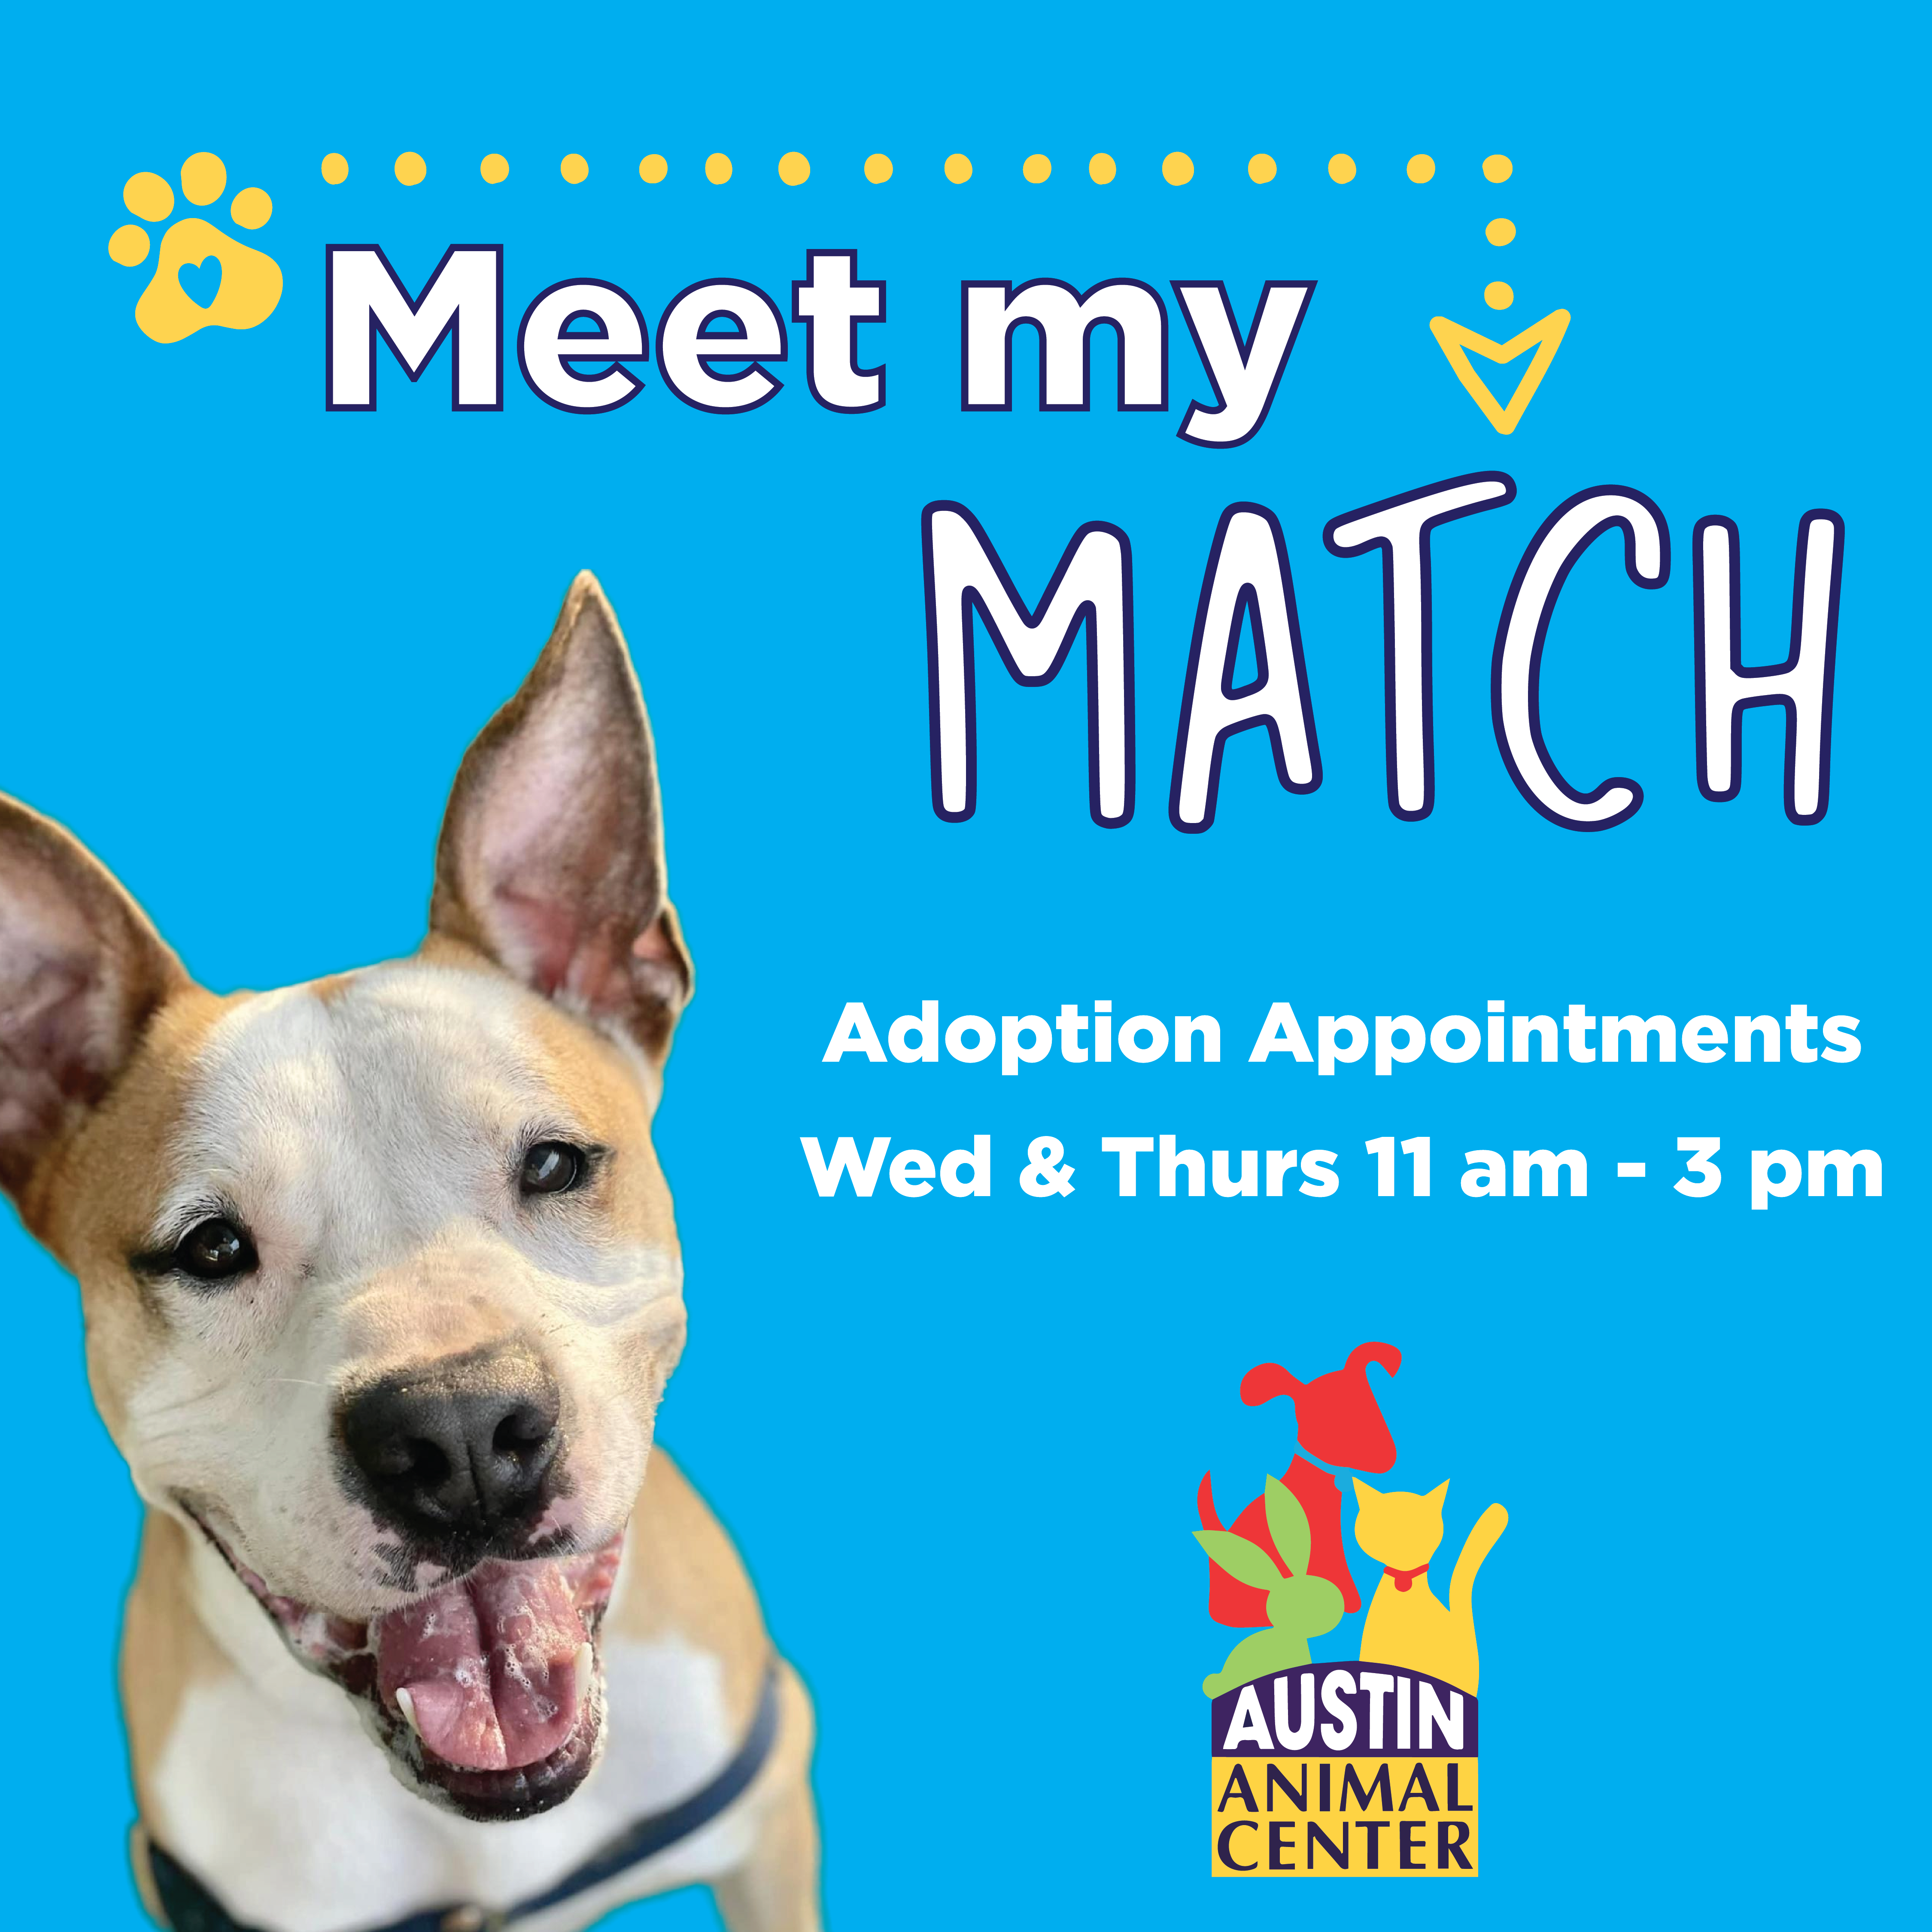 meet my match austin animal center adoption appointments wed and thurs 11-3